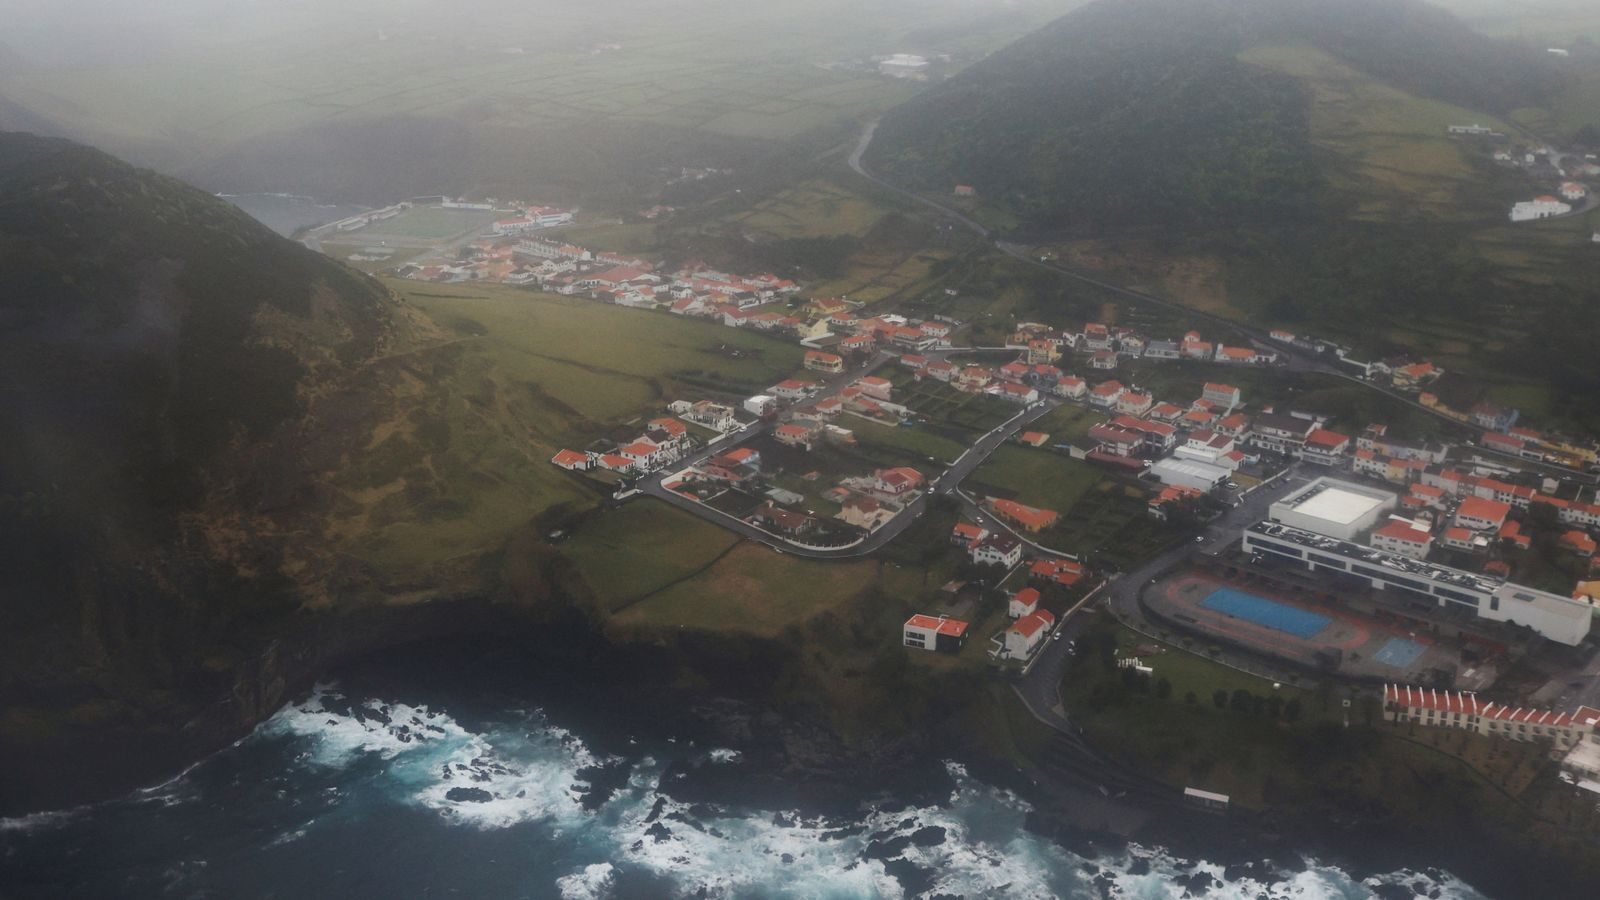 4 Azores earthquake: Locals flee Portuguese island after thousands of earthquakes raise fears